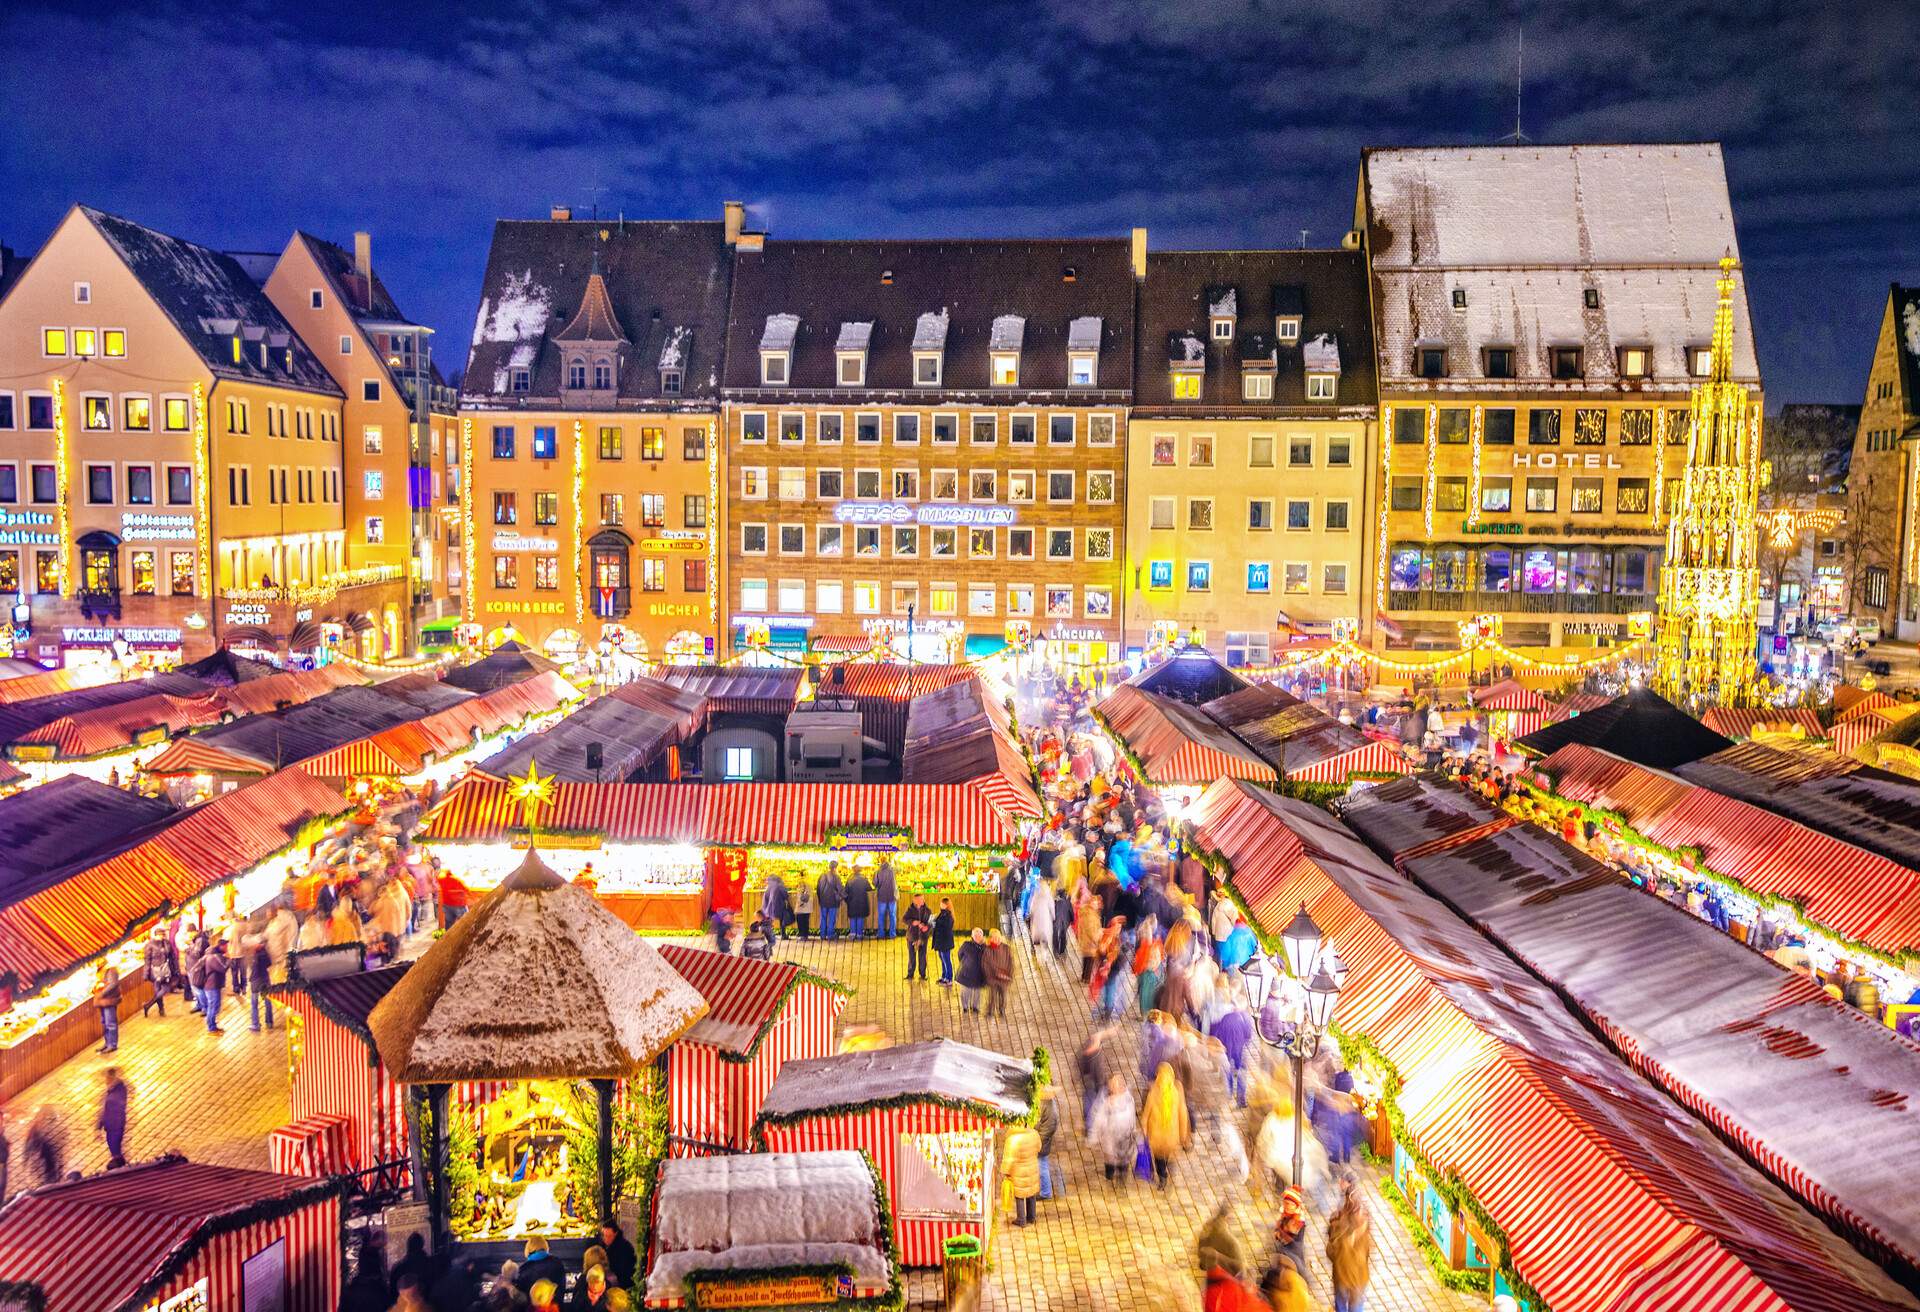 A busy Christmas market with rows of lit-up booths along the vibrant city structures.